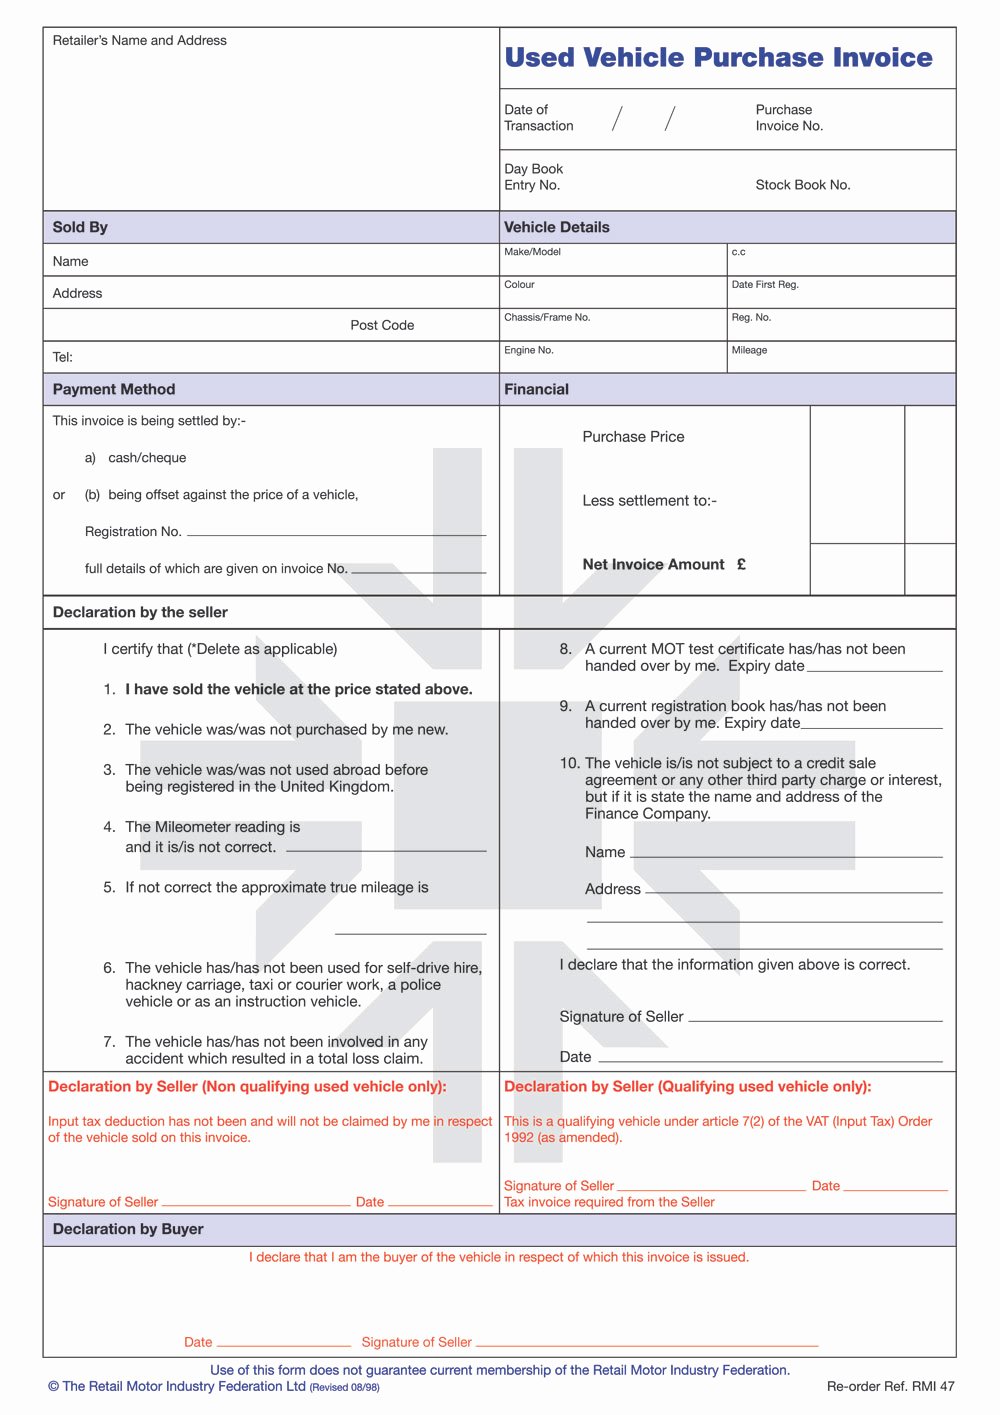 Vehicle Purchase order Template New Rmi047p Used Vehicle Purchase Invoice Pad Rmi Webshop